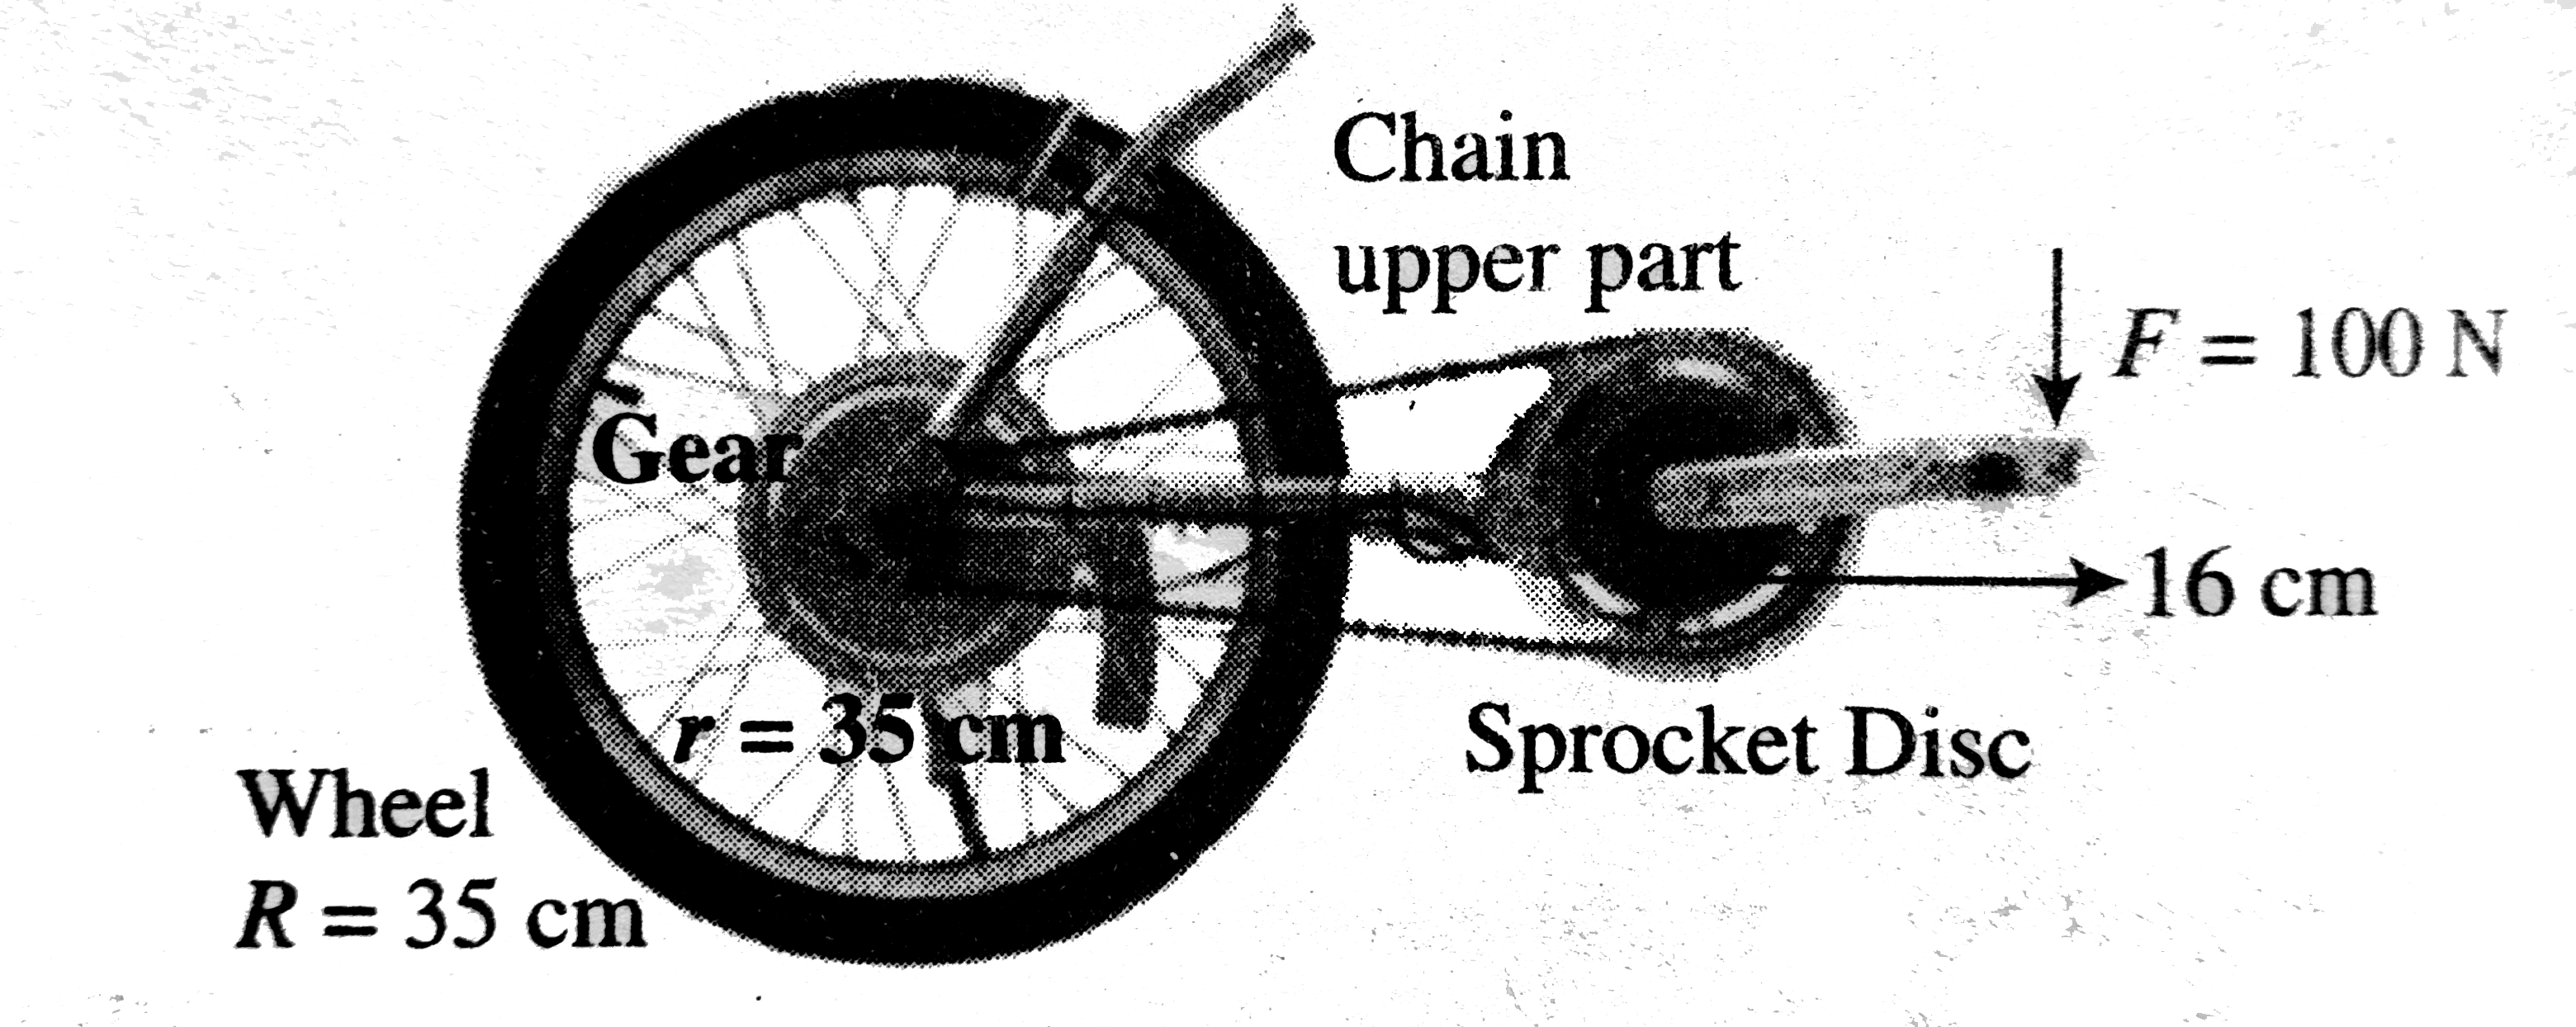 A bicycle has pedal rods of length 16 cm connected to sprocketed disc of radius 10 cm. The bicycle wheels are 70 cm in diameter and the chain runs over a gear of radius 4cm. The speed of the cycle is constant and the cyclist applies 100 N for, that is always perpendicular to the pedal rod, as shown in figure. Assume tension in the lower part of chain is negligible. The cyclist is peddling at a constant rate of two revolutions per second. Assume that the force applied by other foot is zero when one foot is exerting 100 N force. Neglect friction within cycle parts and the rolling friction.      The power delivered by the cyclist is equal to